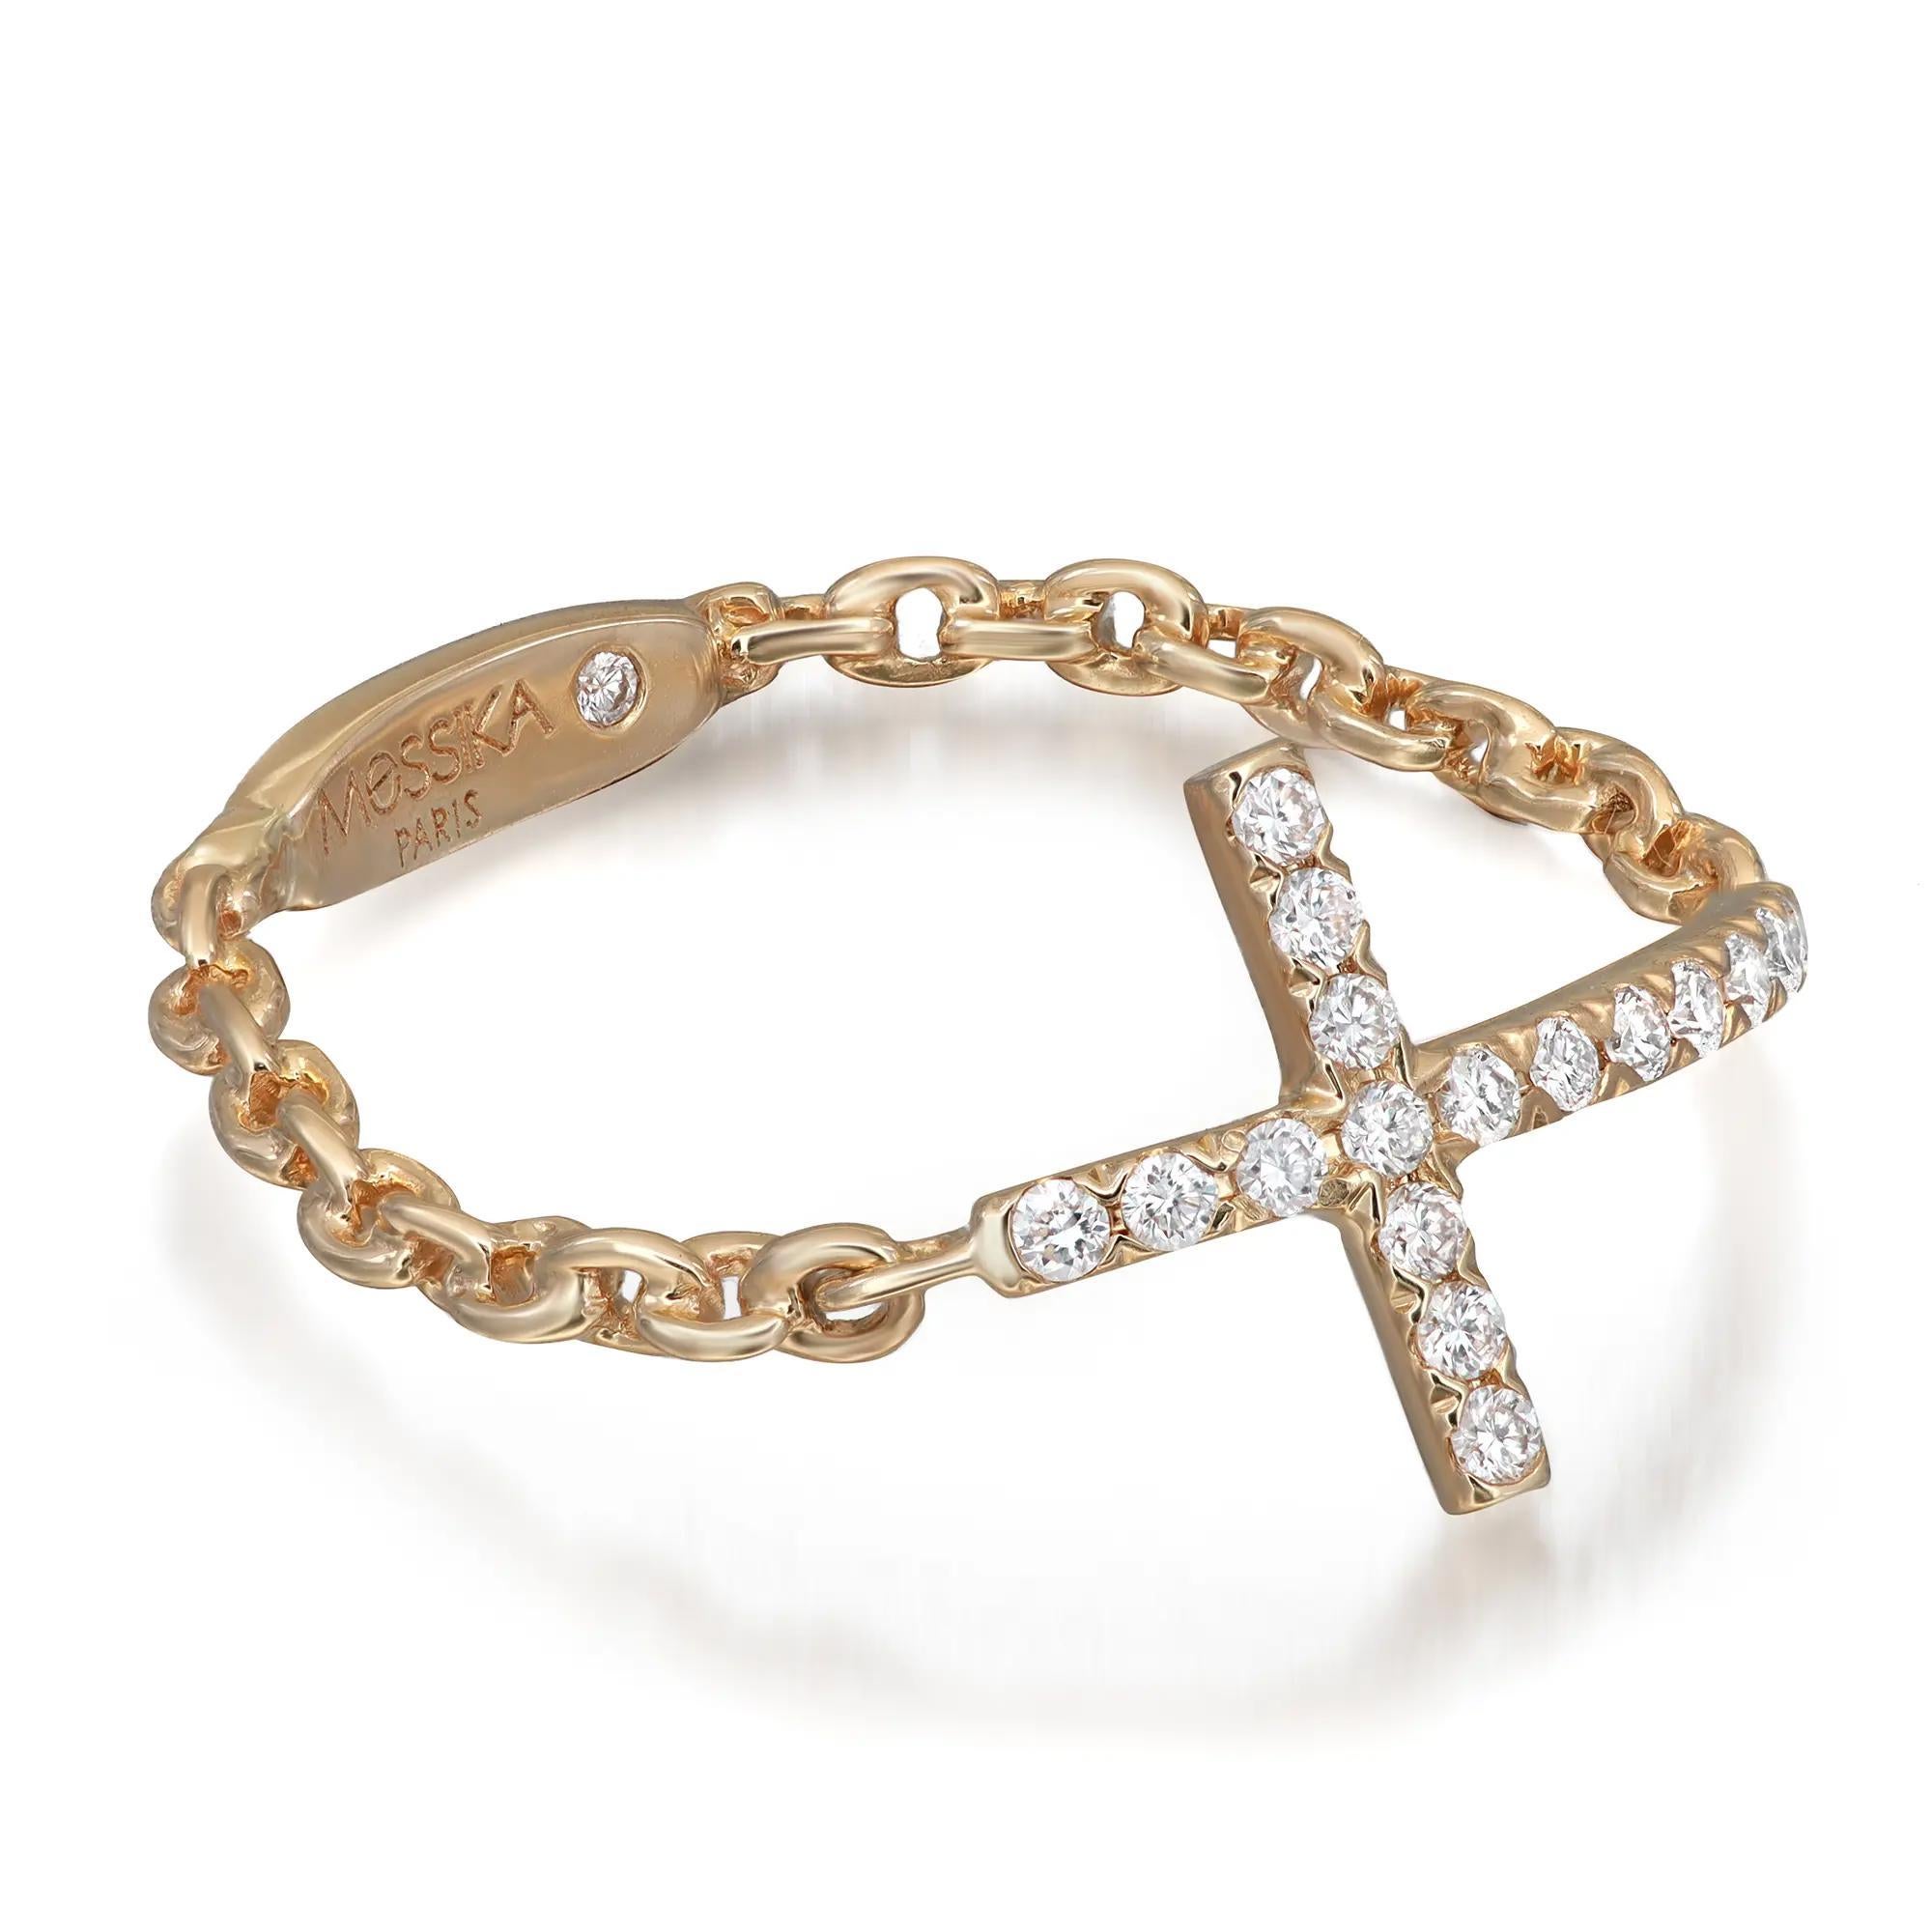 Modern and delicate, Messika Croix Sur Chaine diamond ring crafted in 18K yellow gold. This ring features pave set round brilliant cut diamonds weighing 0.11 carat, set in a cross shape shank. Diamond color G and VS clarity. It's stackable and easy